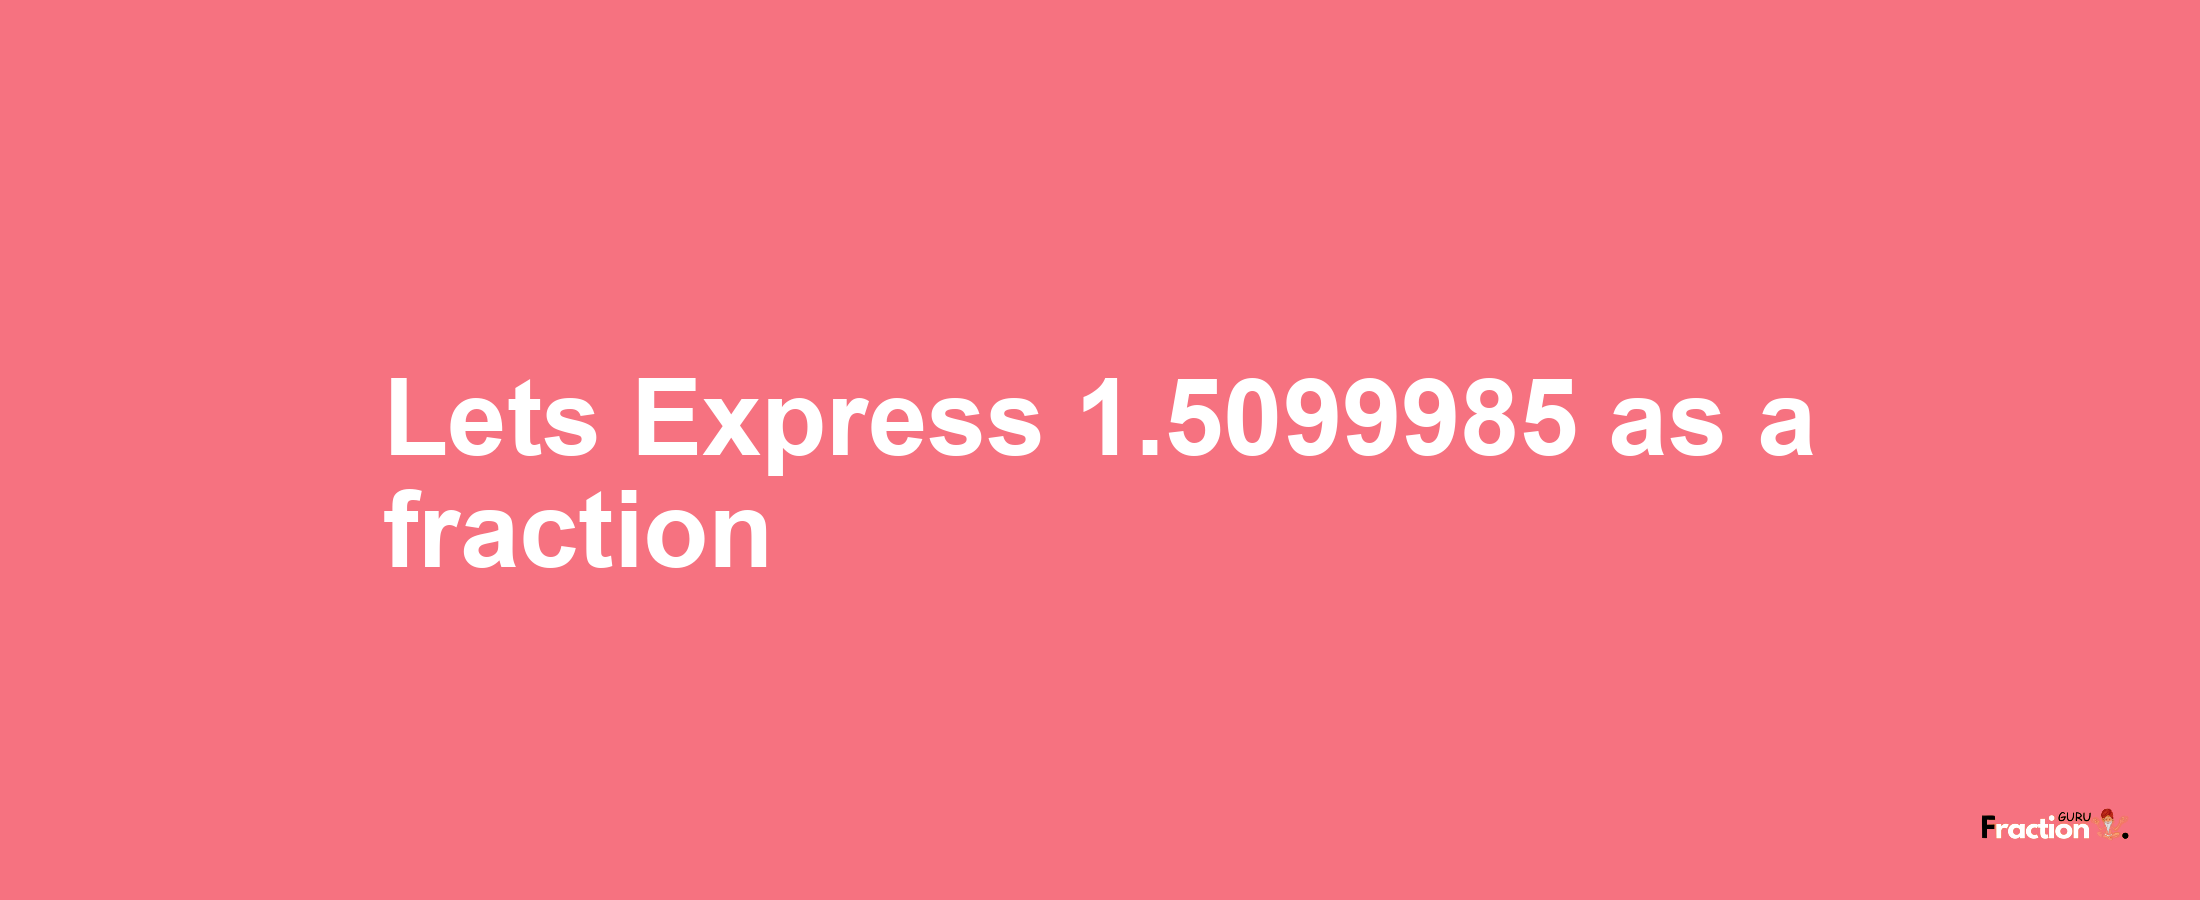 Lets Express 1.5099985 as afraction